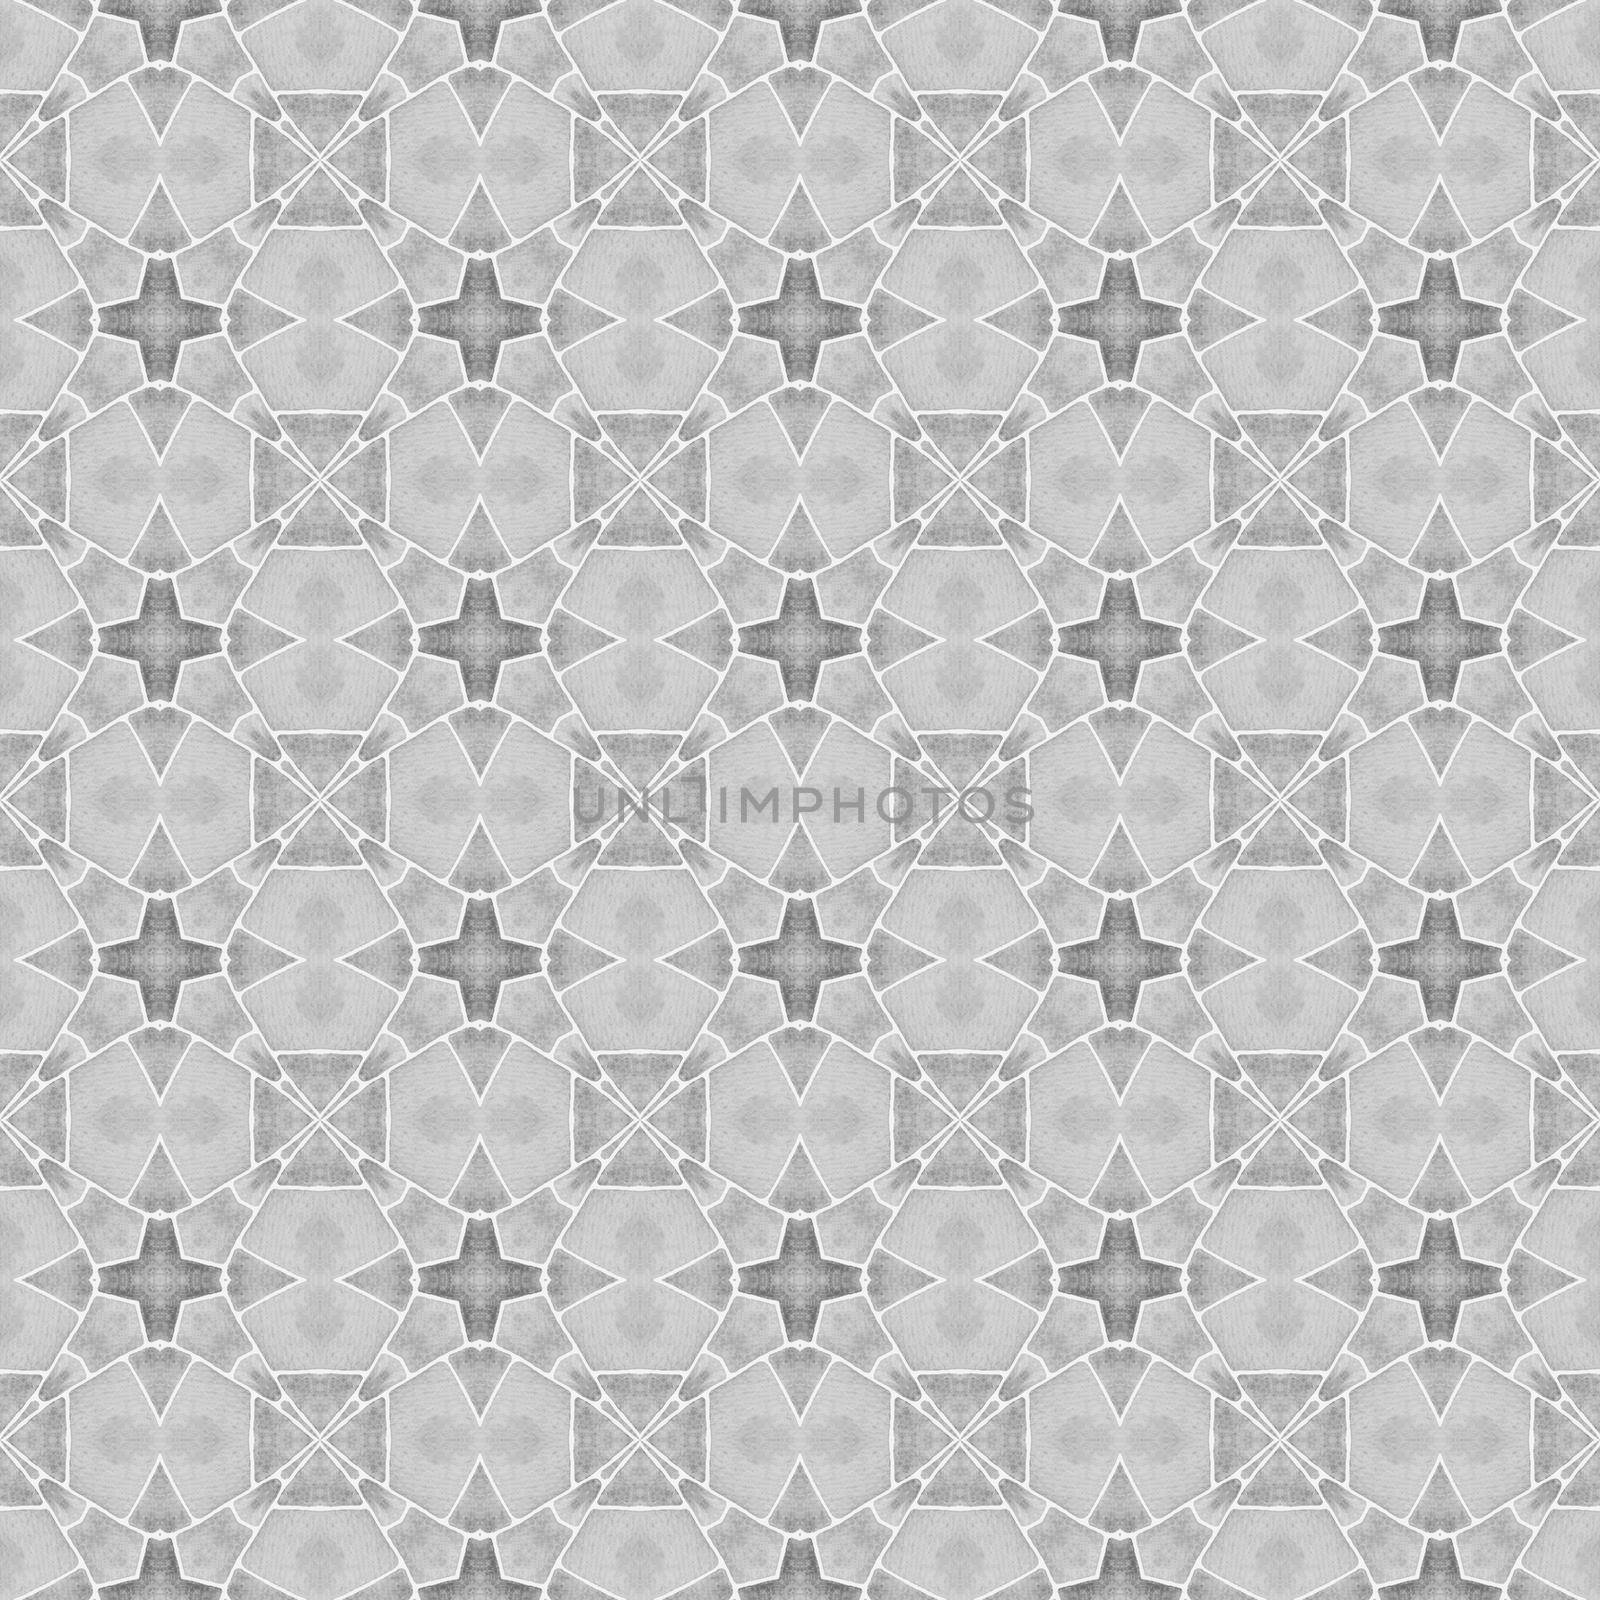 Medallion seamless pattern. Black and white by beginagain